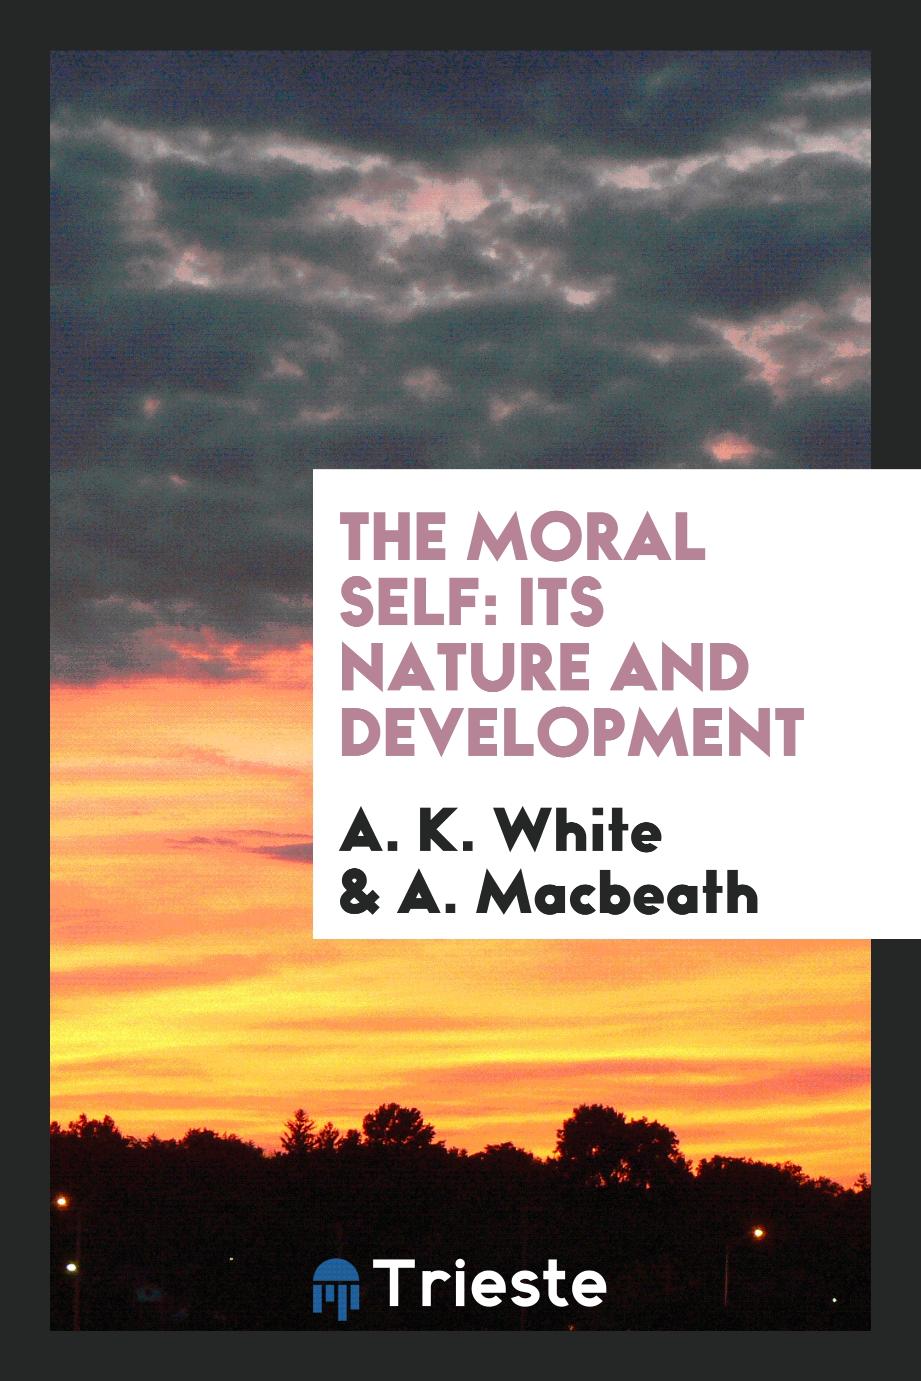 The moral self: its nature and development